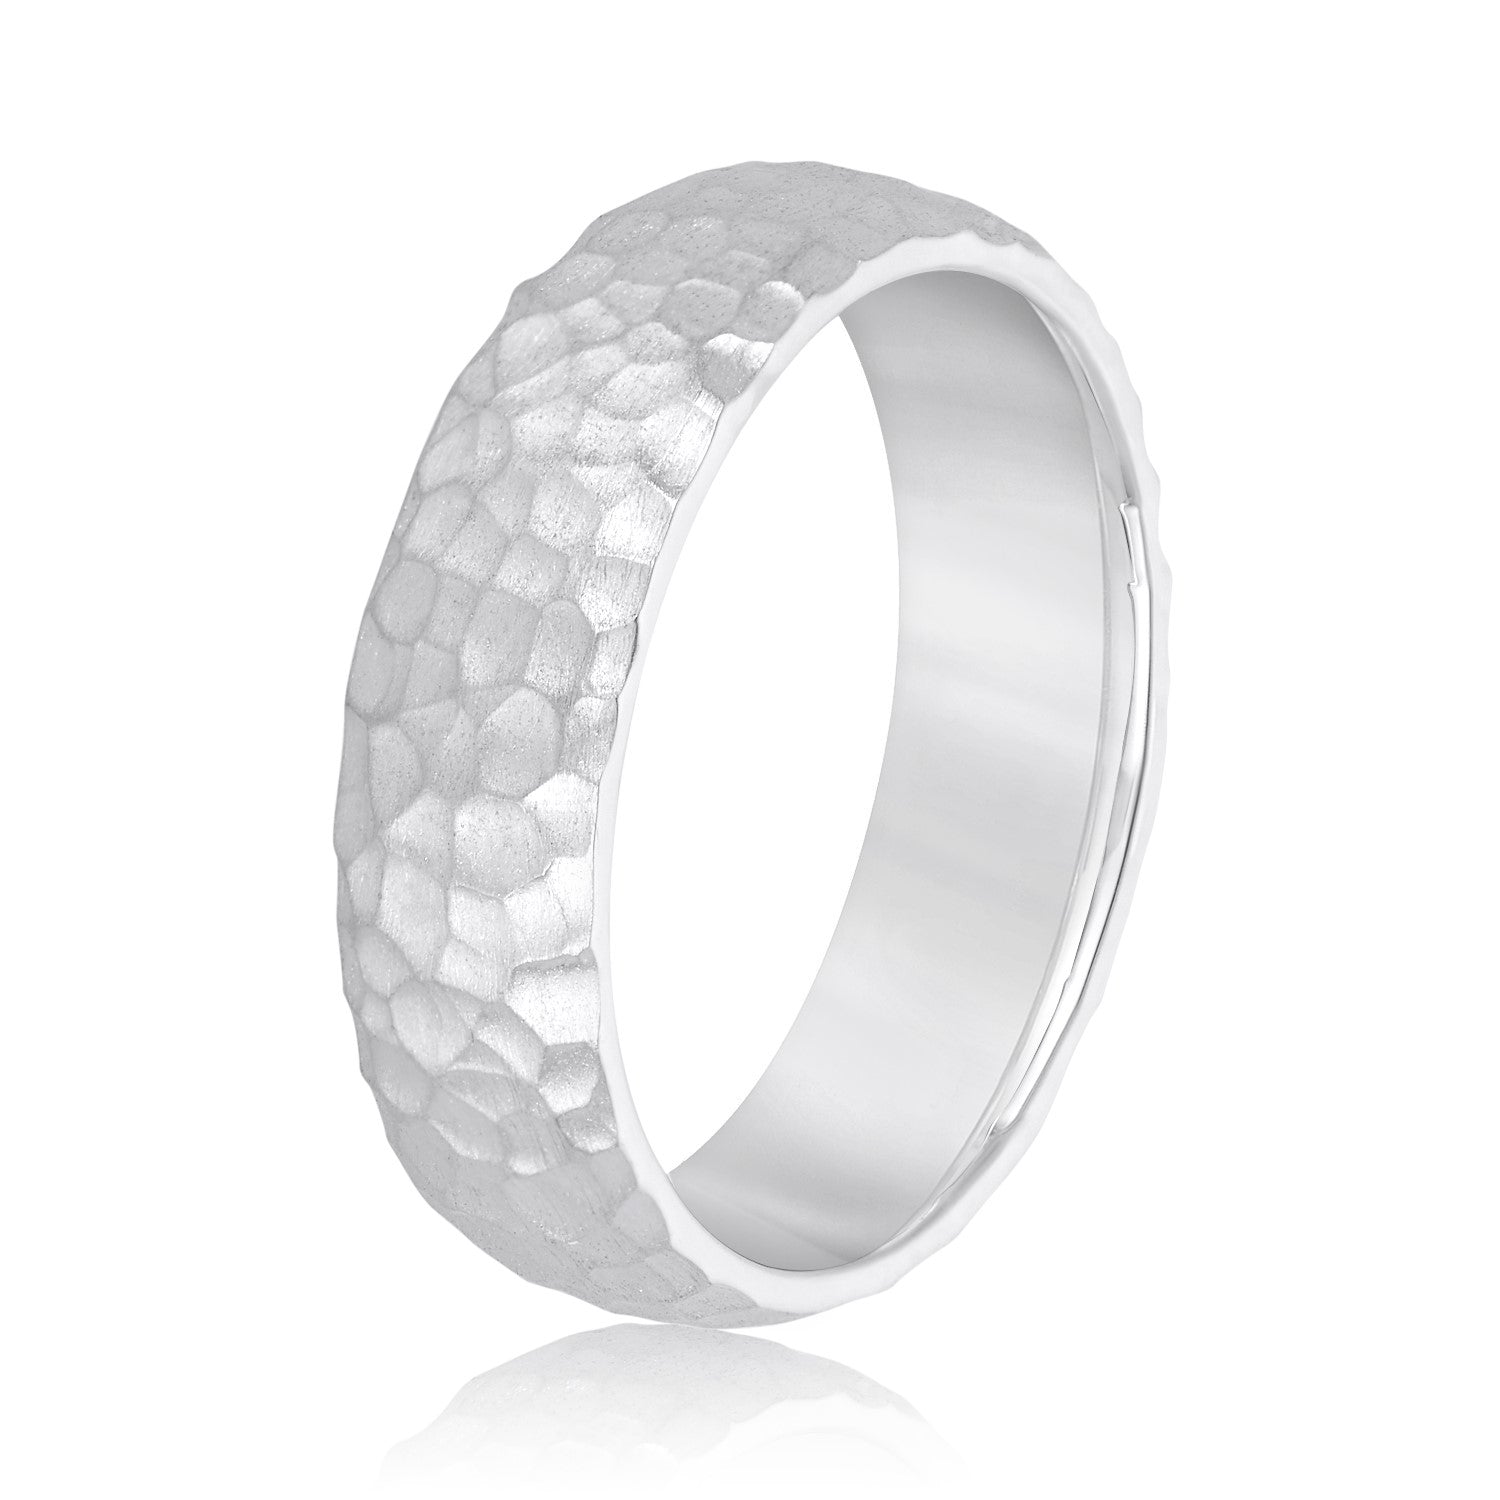 Men’s Classic Hammered Wedding Band